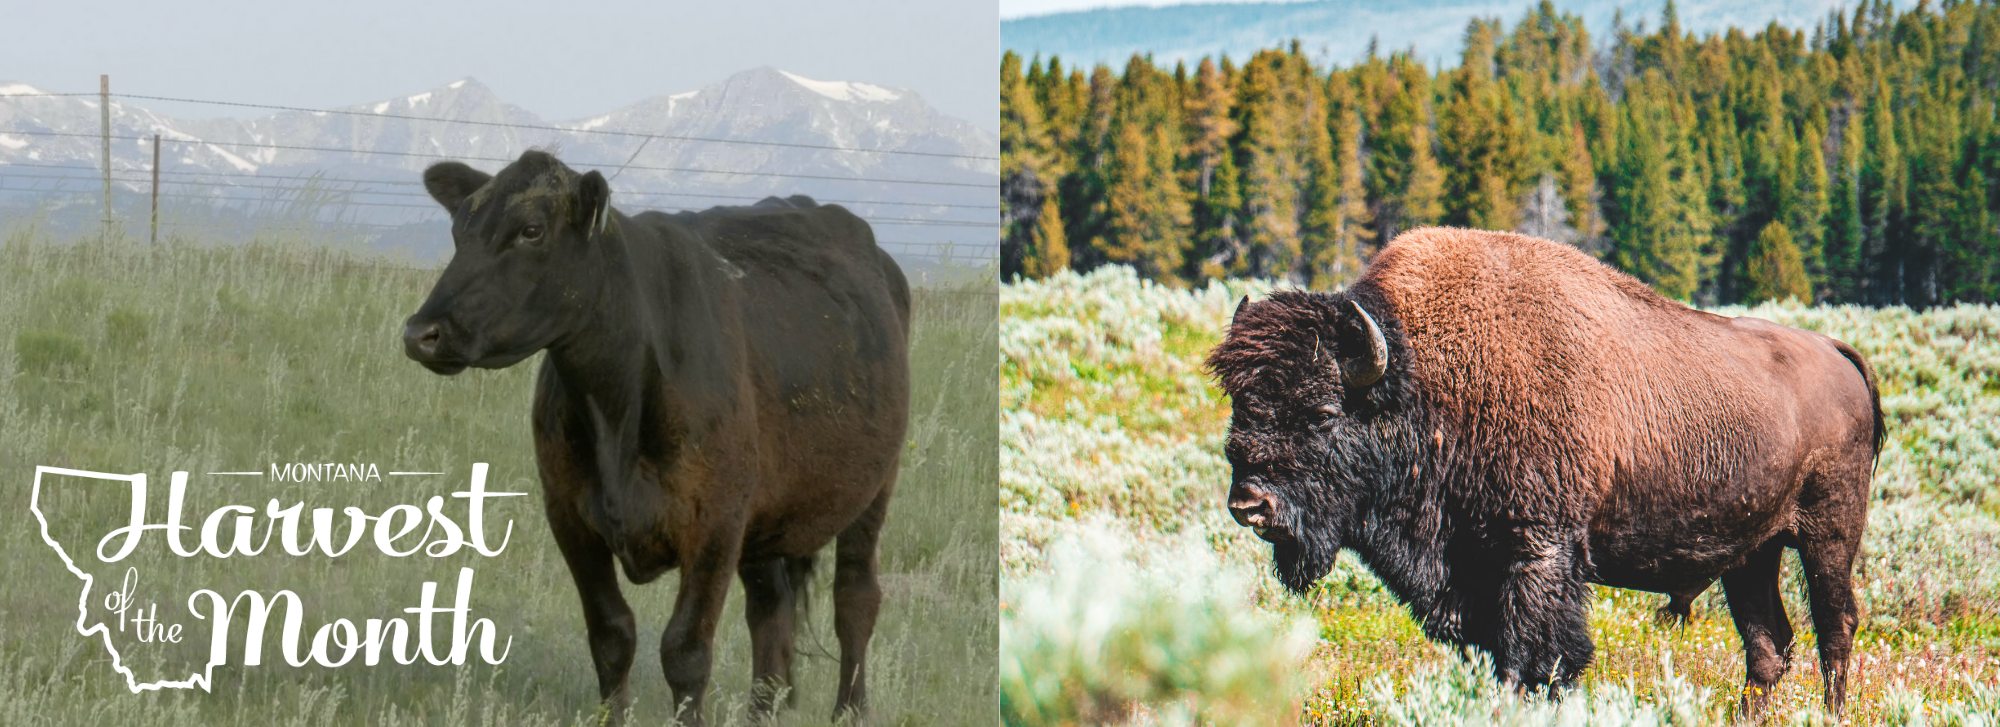 This month's harvest of the month are bison and beef!